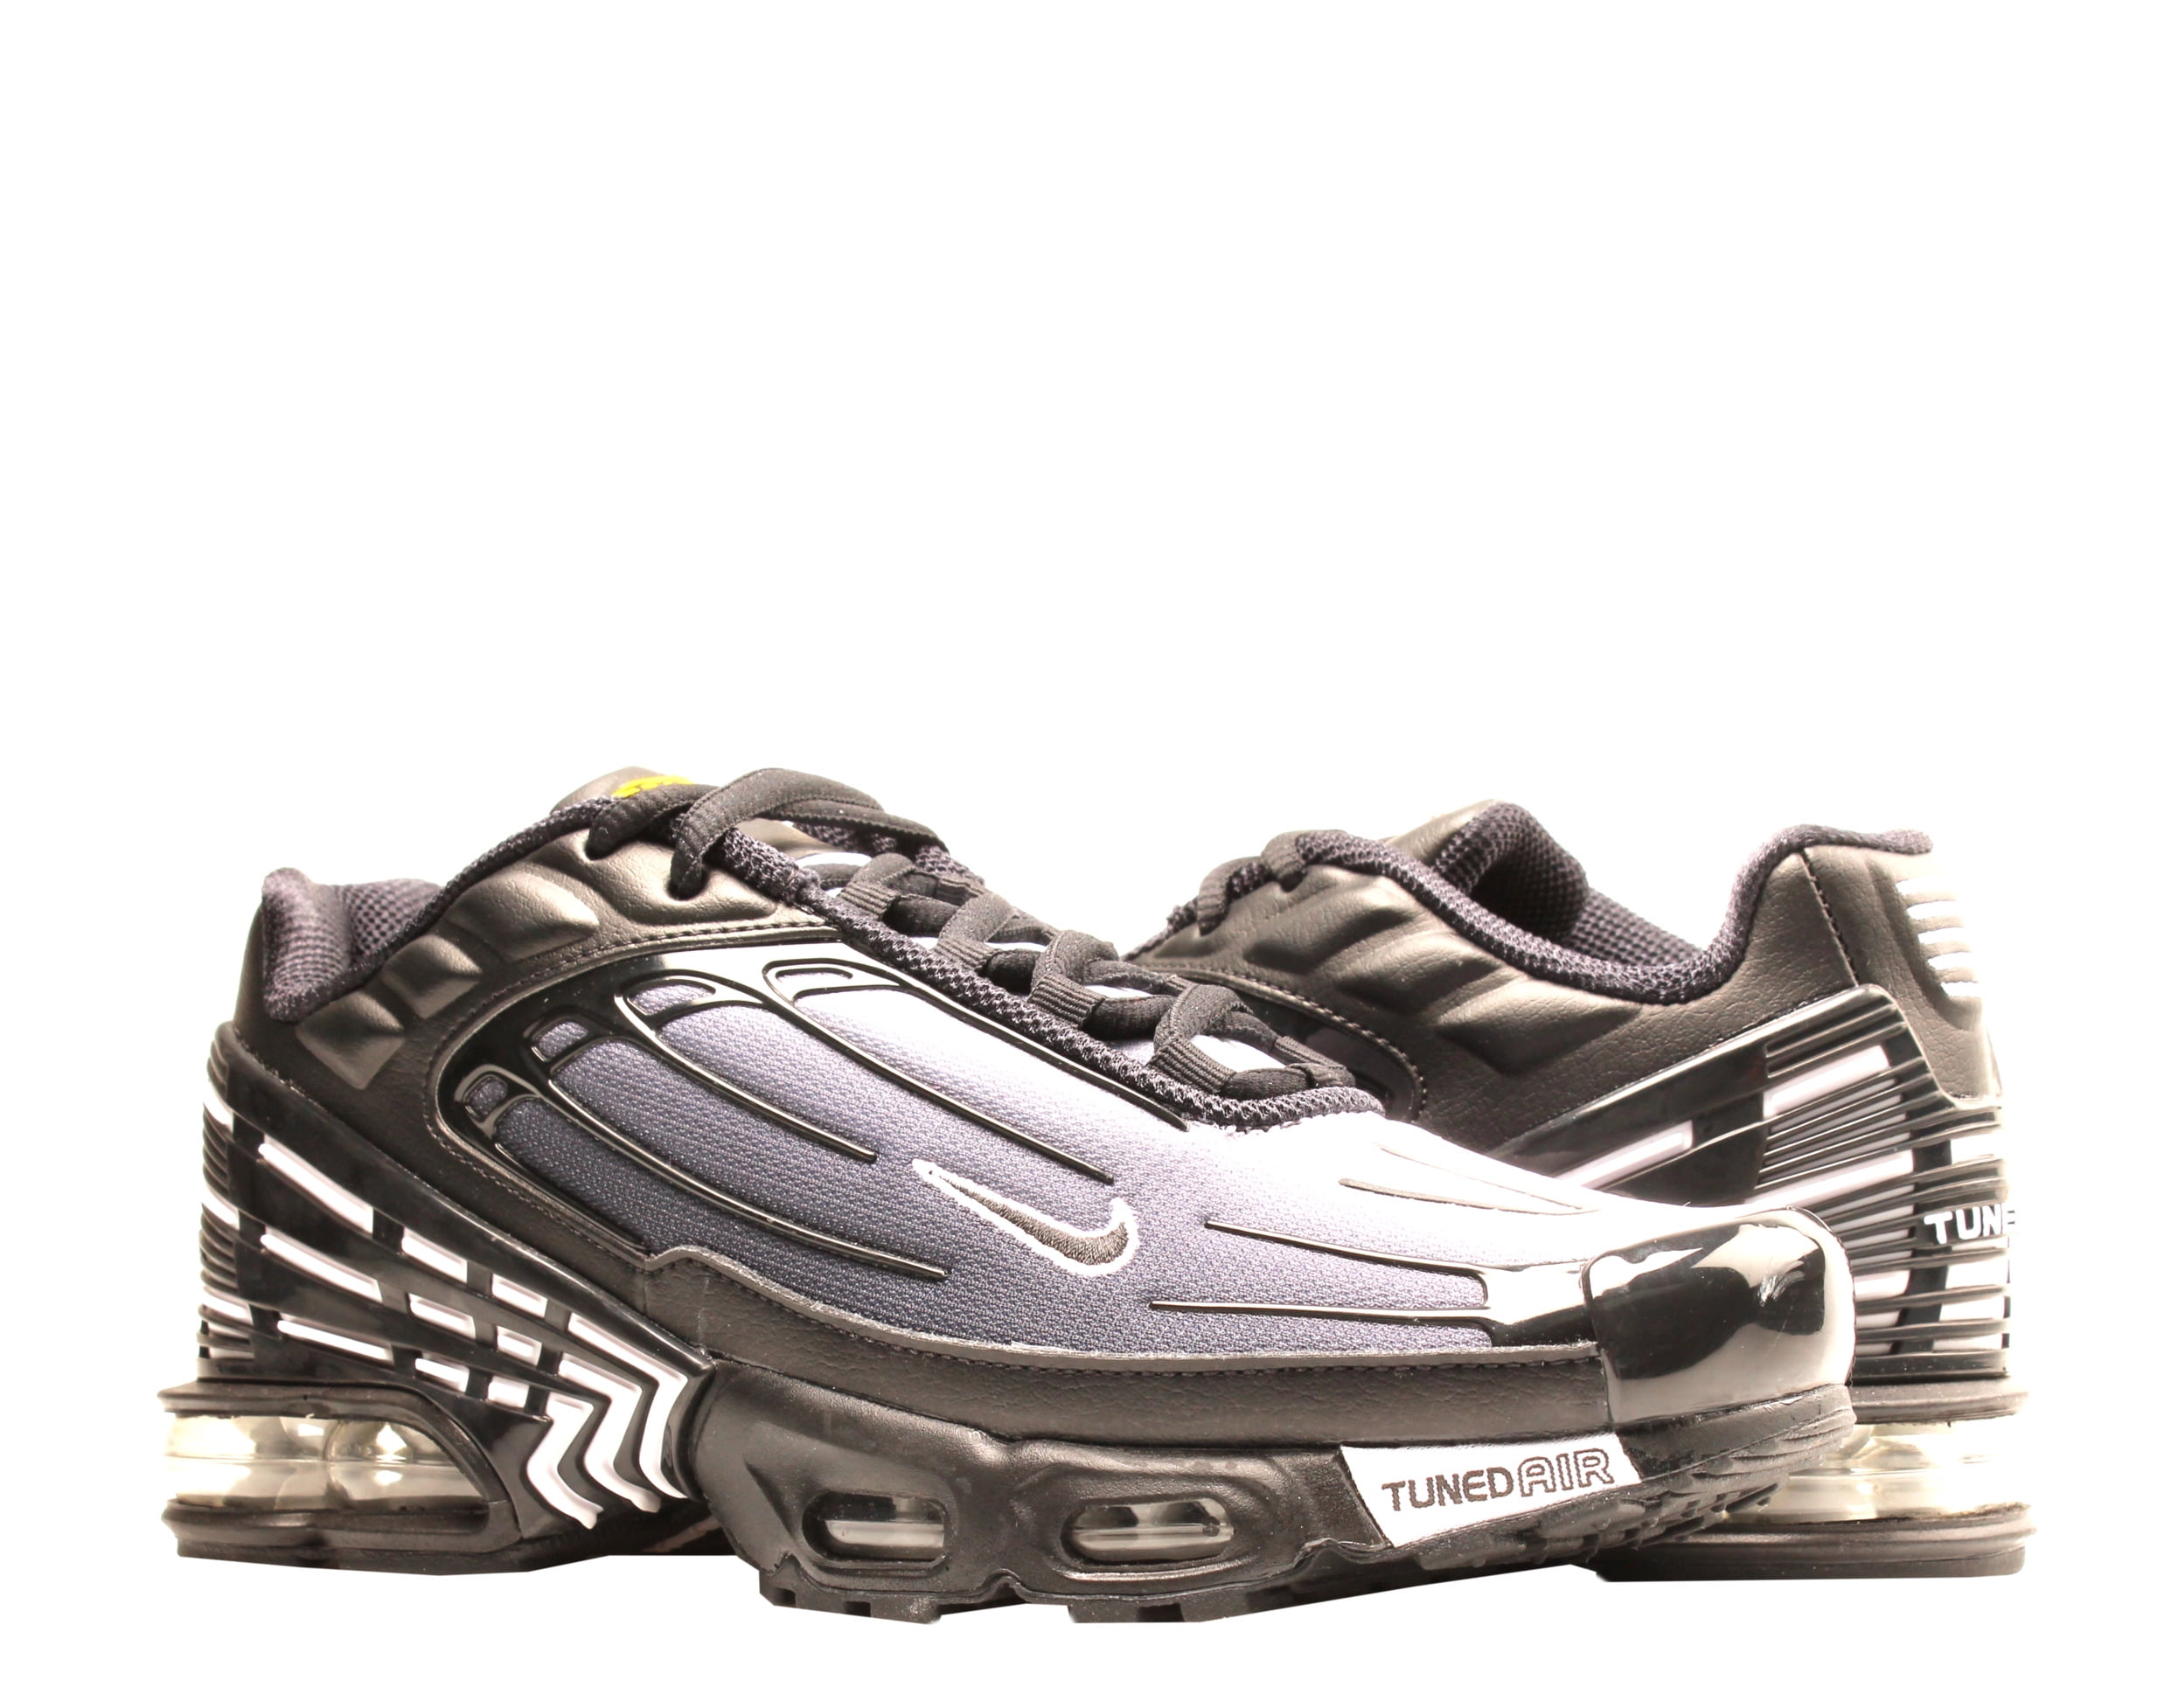 Nike Air Max Plus III Men's Shoes Size -